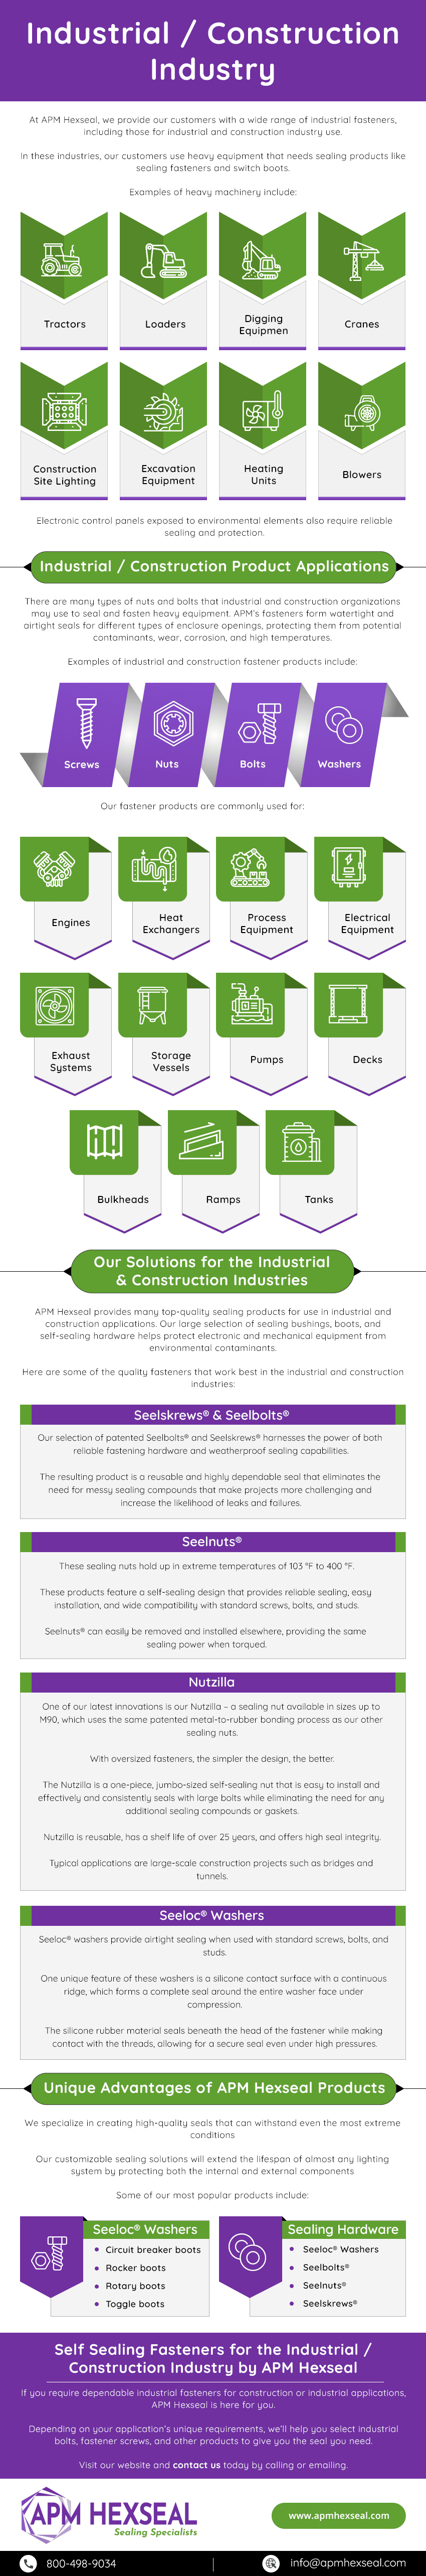 Industrial/Construction Industry